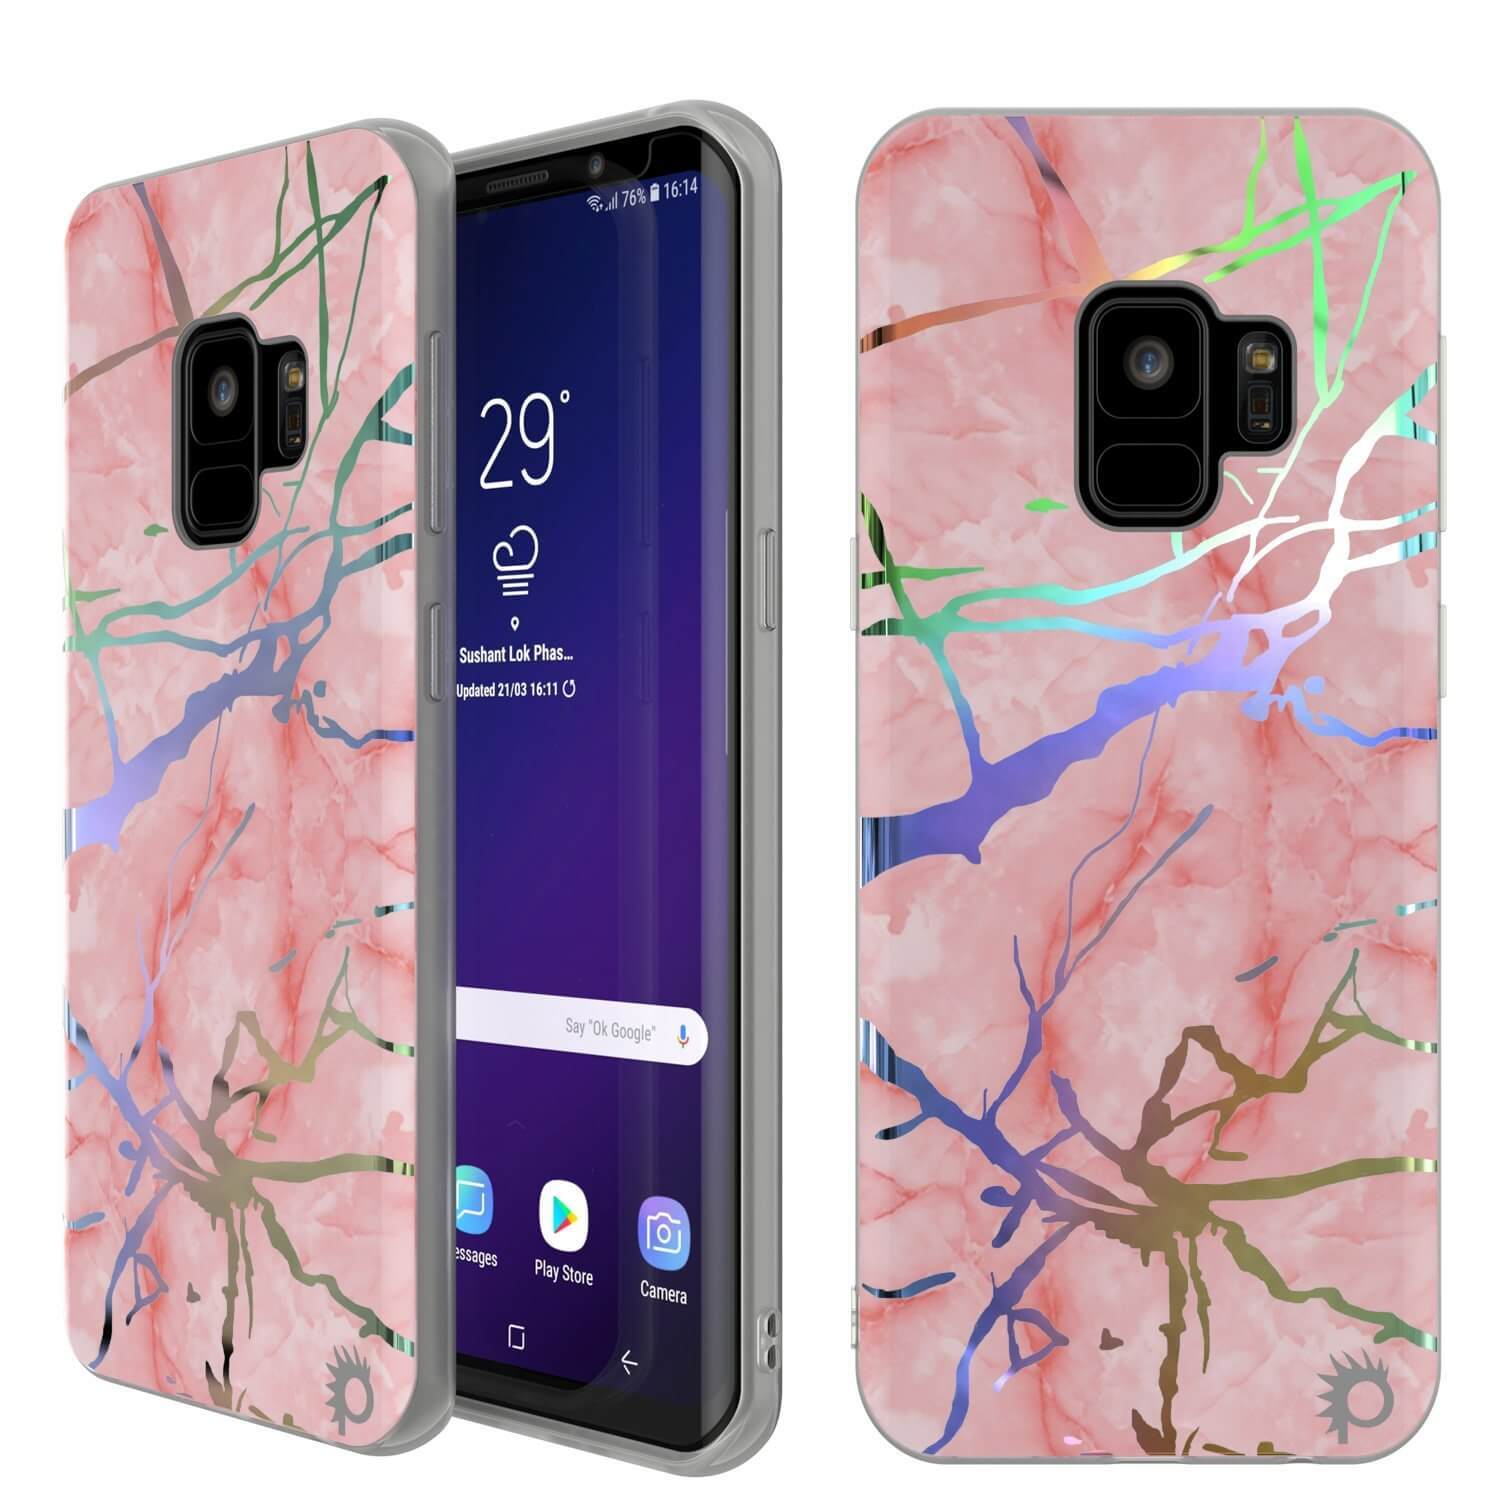 Punkcase Galaxy S9 Marble Case, Protective Full Body Cover W/PunkShield Screen Protector (Rose Mirage)